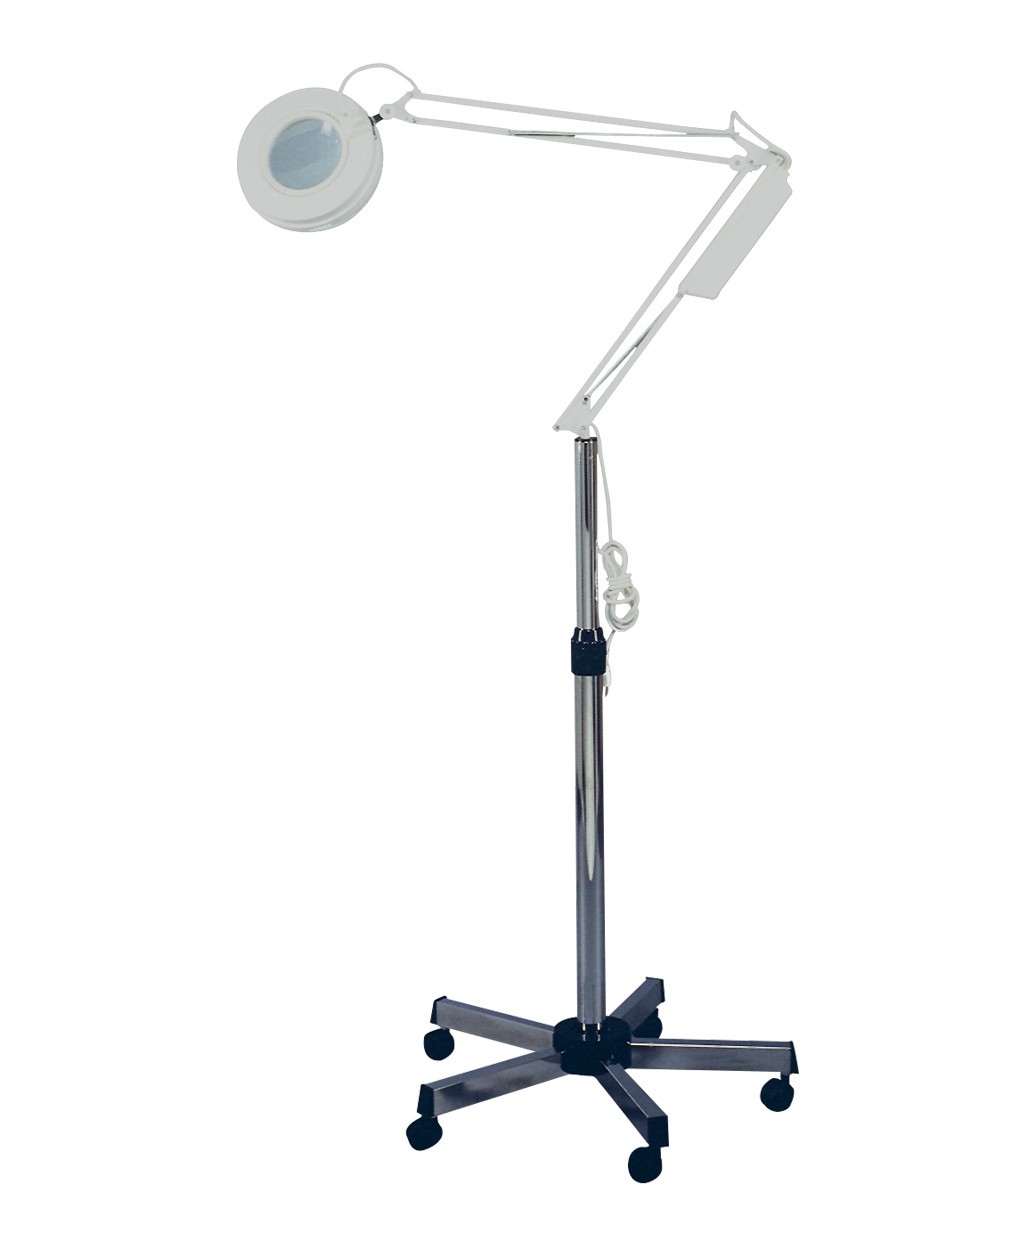 Pibbs 2010C 5 Diopter Magnifying Lamp with Caster Base